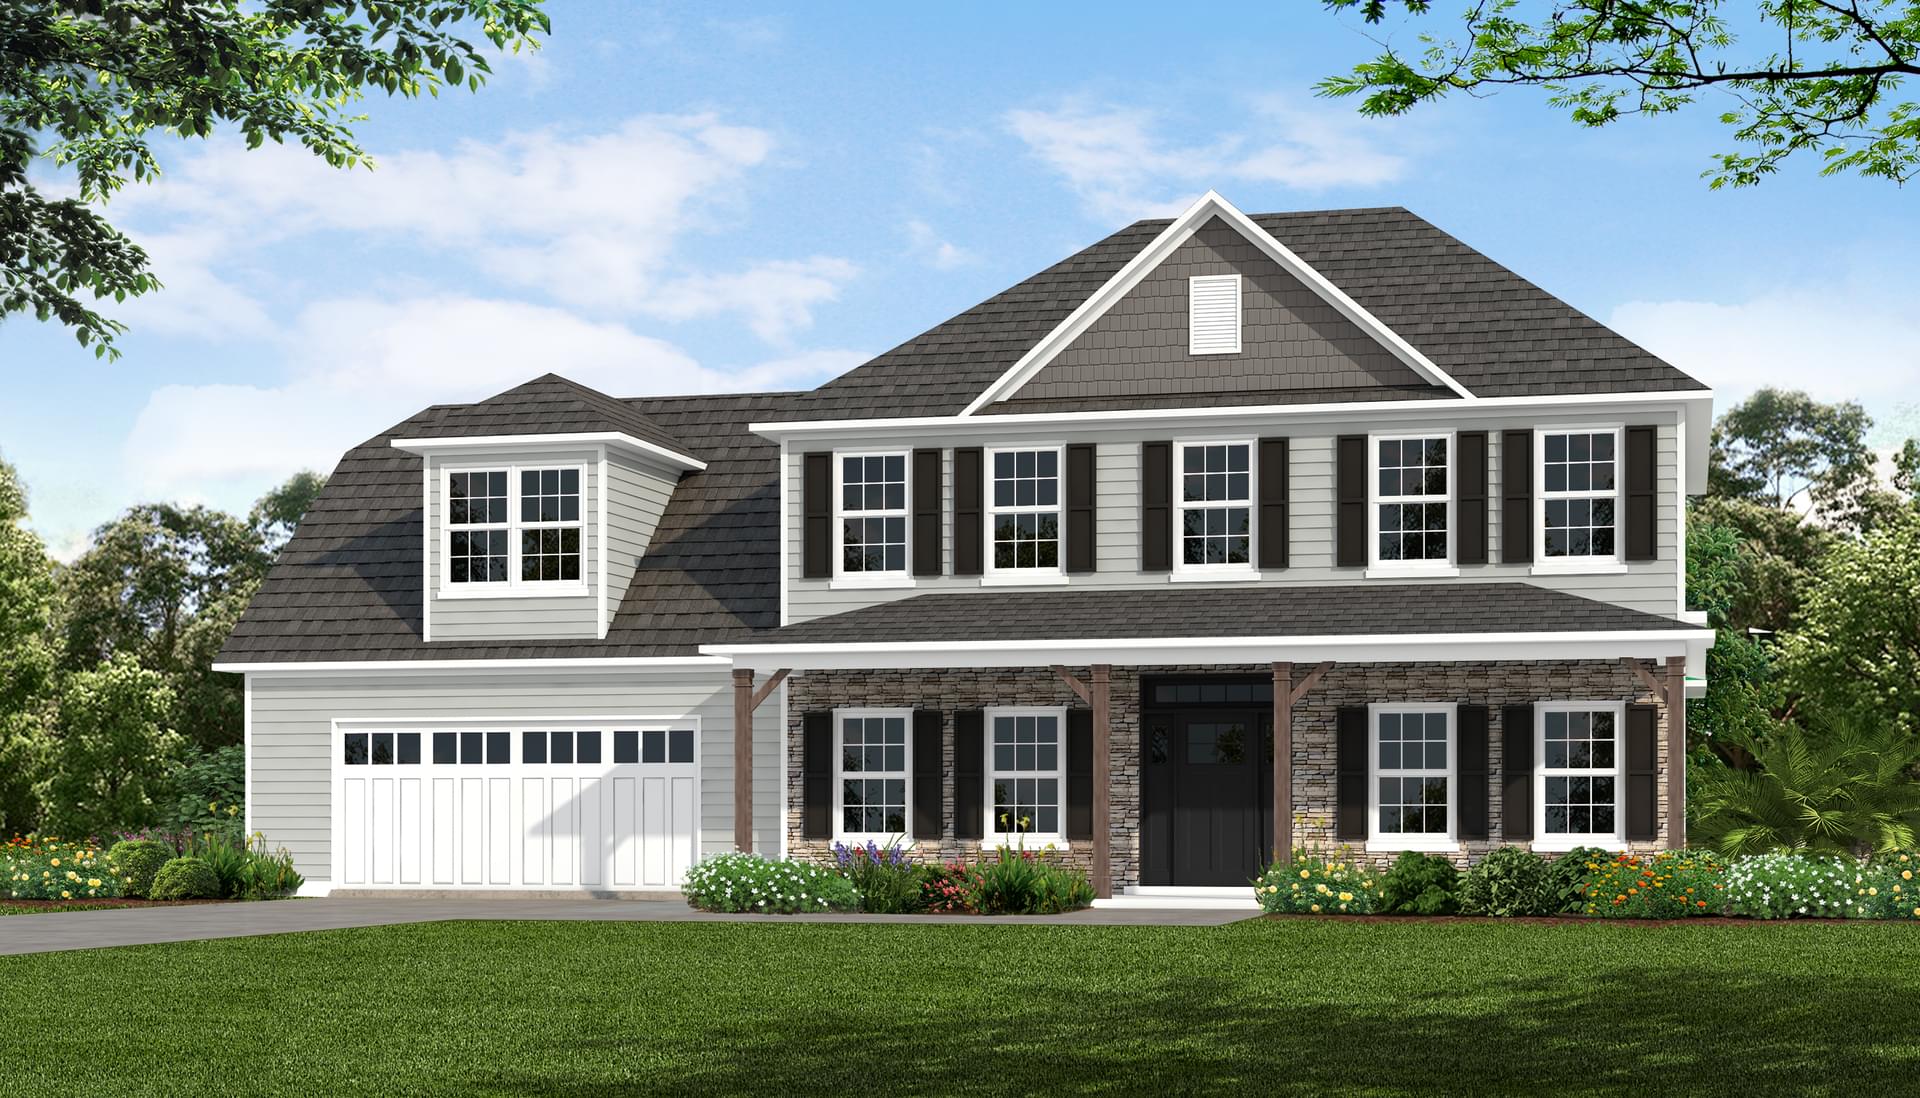 8812 Rainer Way in Wake Forest, NC from Caviness & Cates Communities